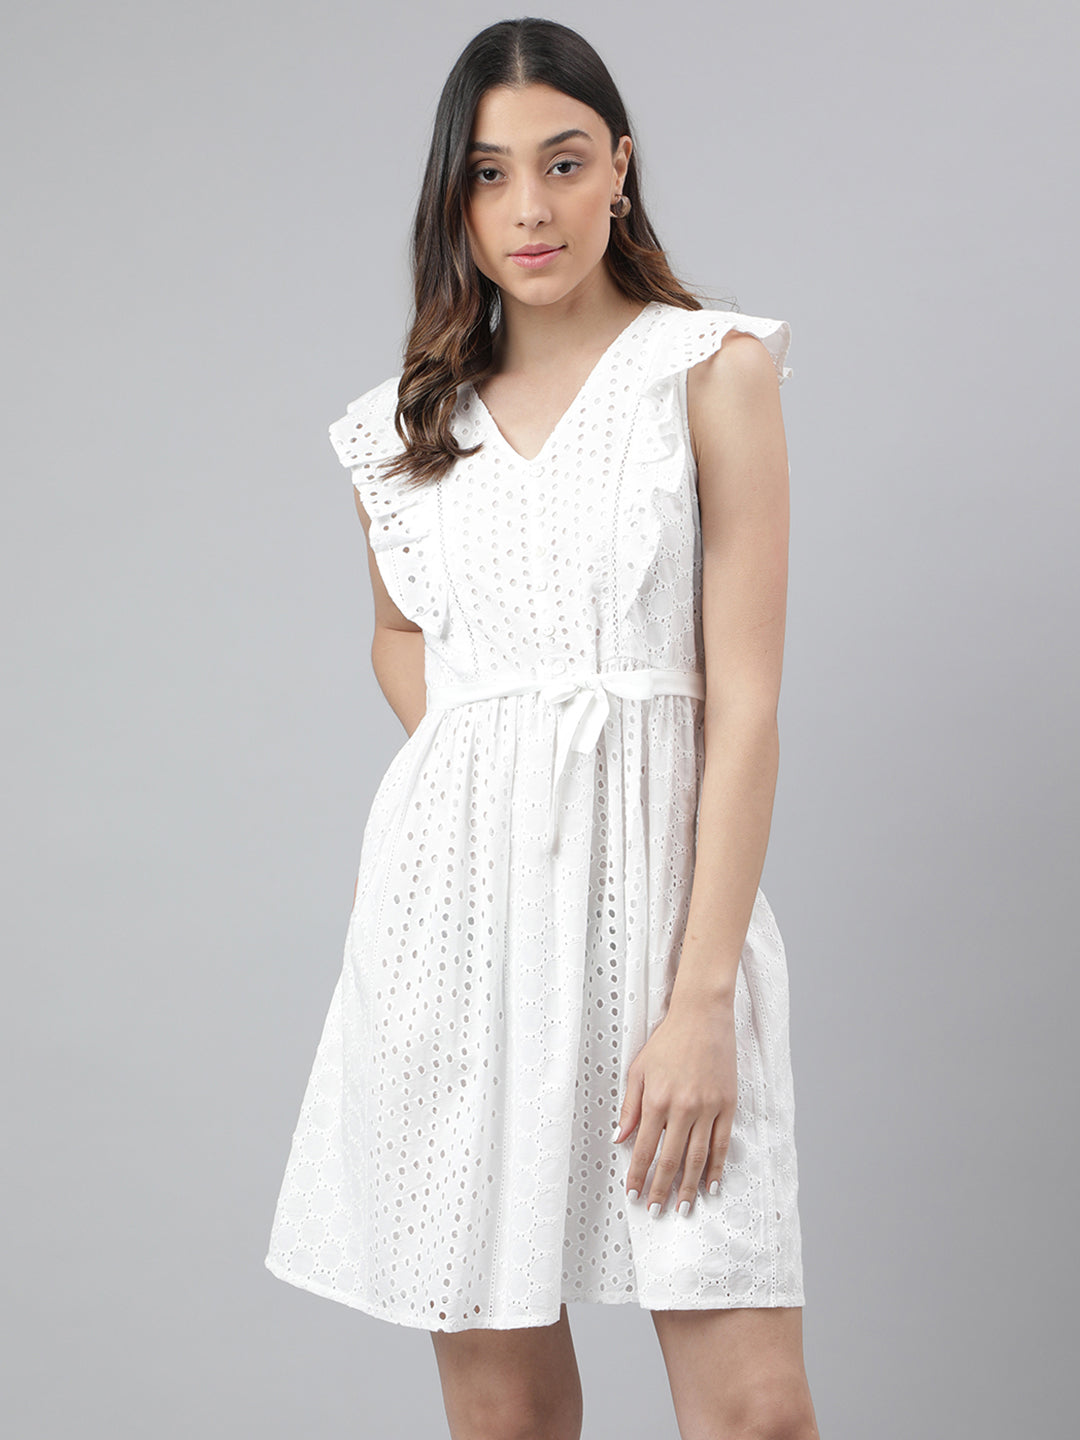 White Cap Sleeve V-Neck Solid A-Line Women Dress for Casual